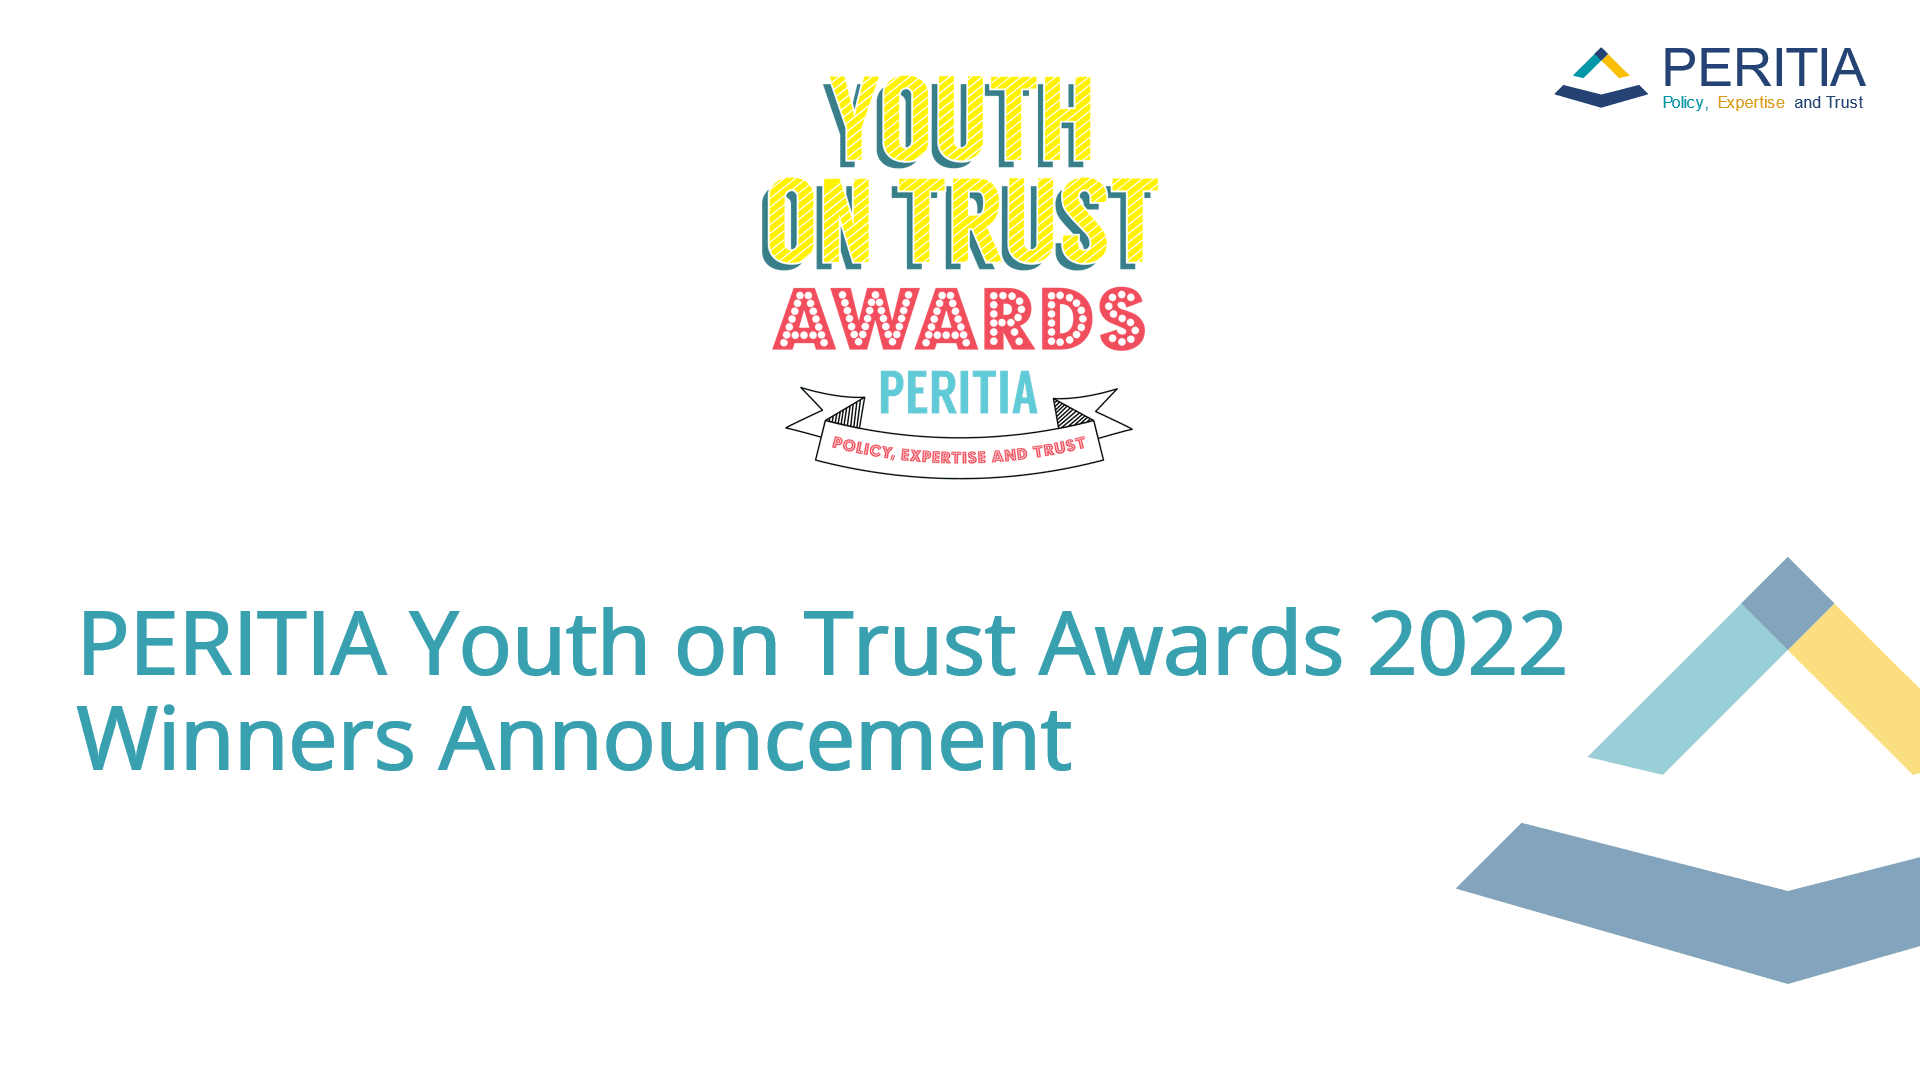 Congratulations to the Winners of the Youth on Trust Awards!